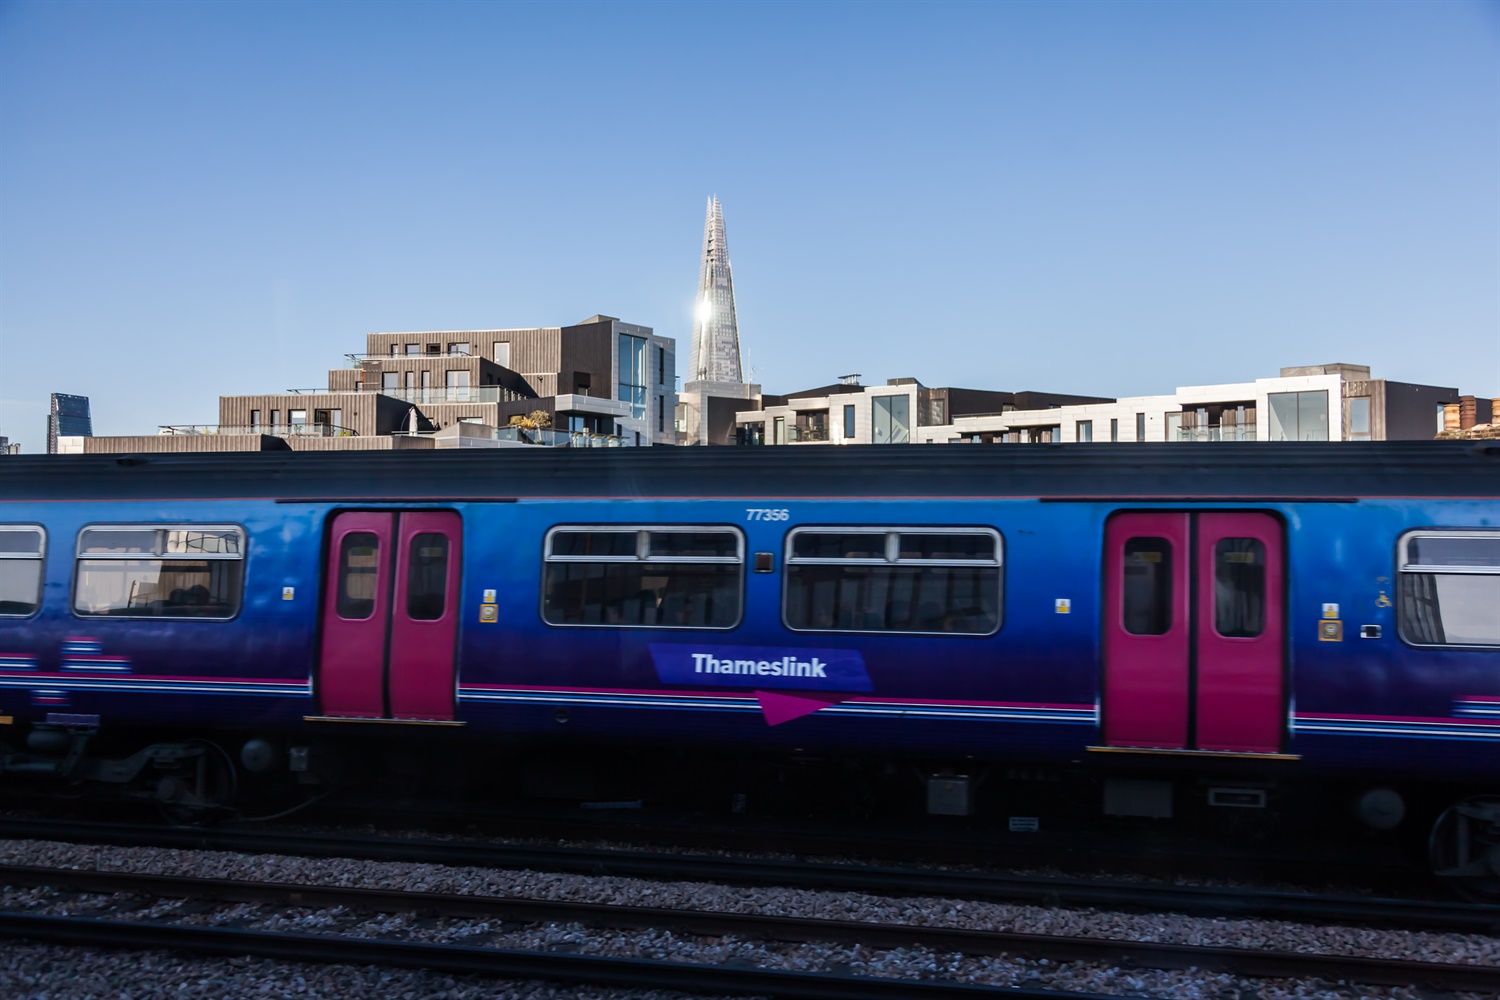 GTR could lose its franchise if services don’t improve after new timetable